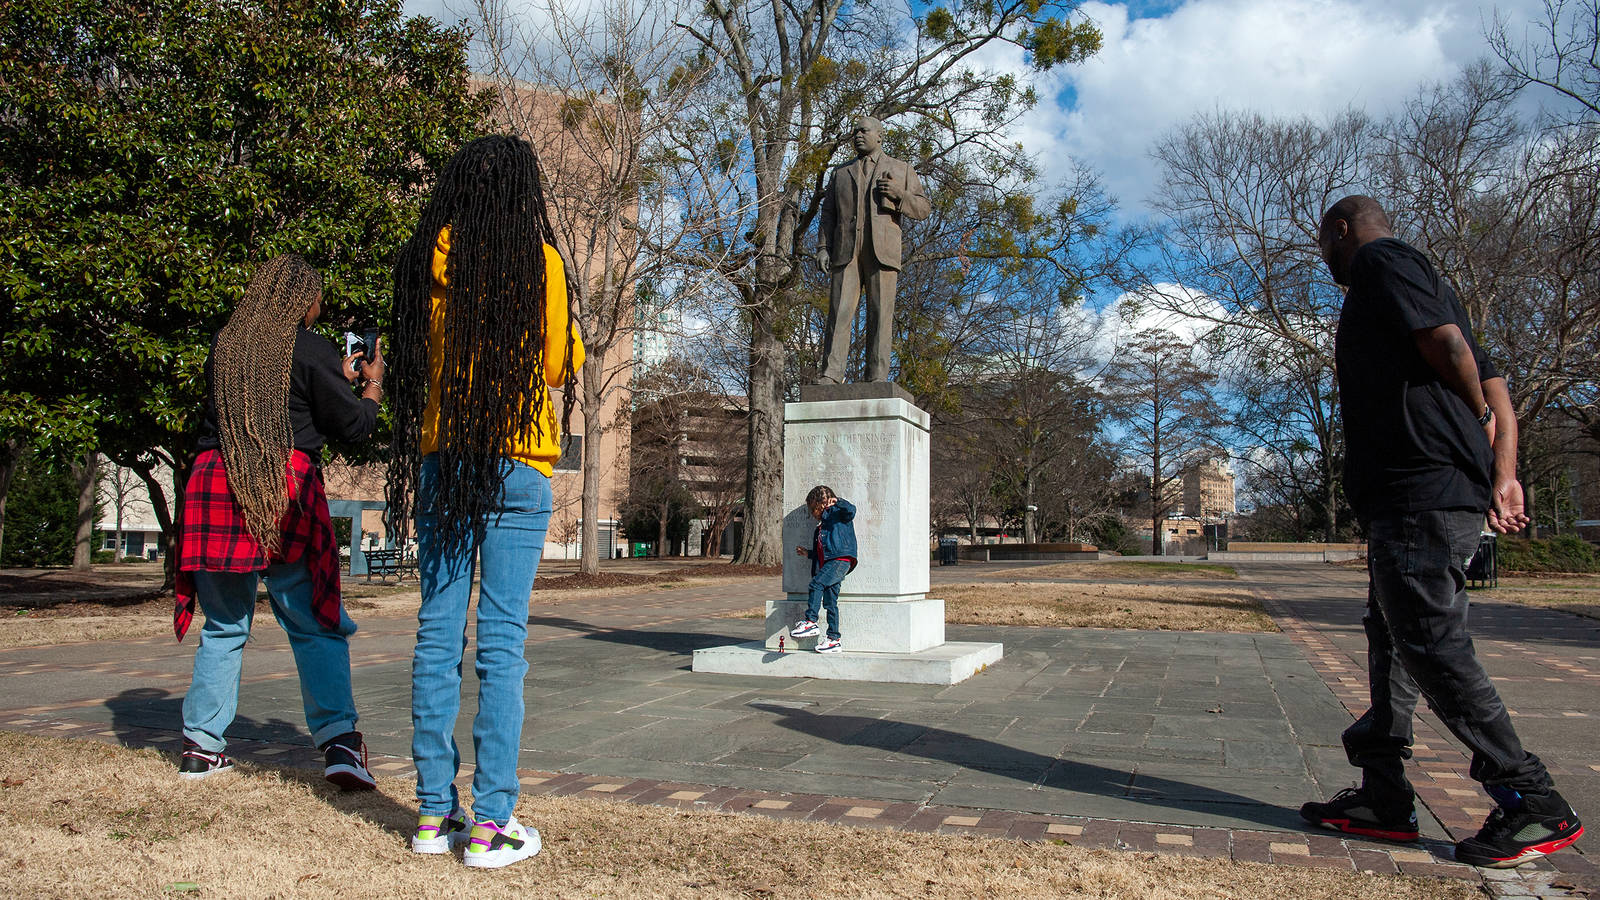 <p>Nia Davis (left) photographs her son, Mason, next to the statue of Martin Luther King Jr.</p>